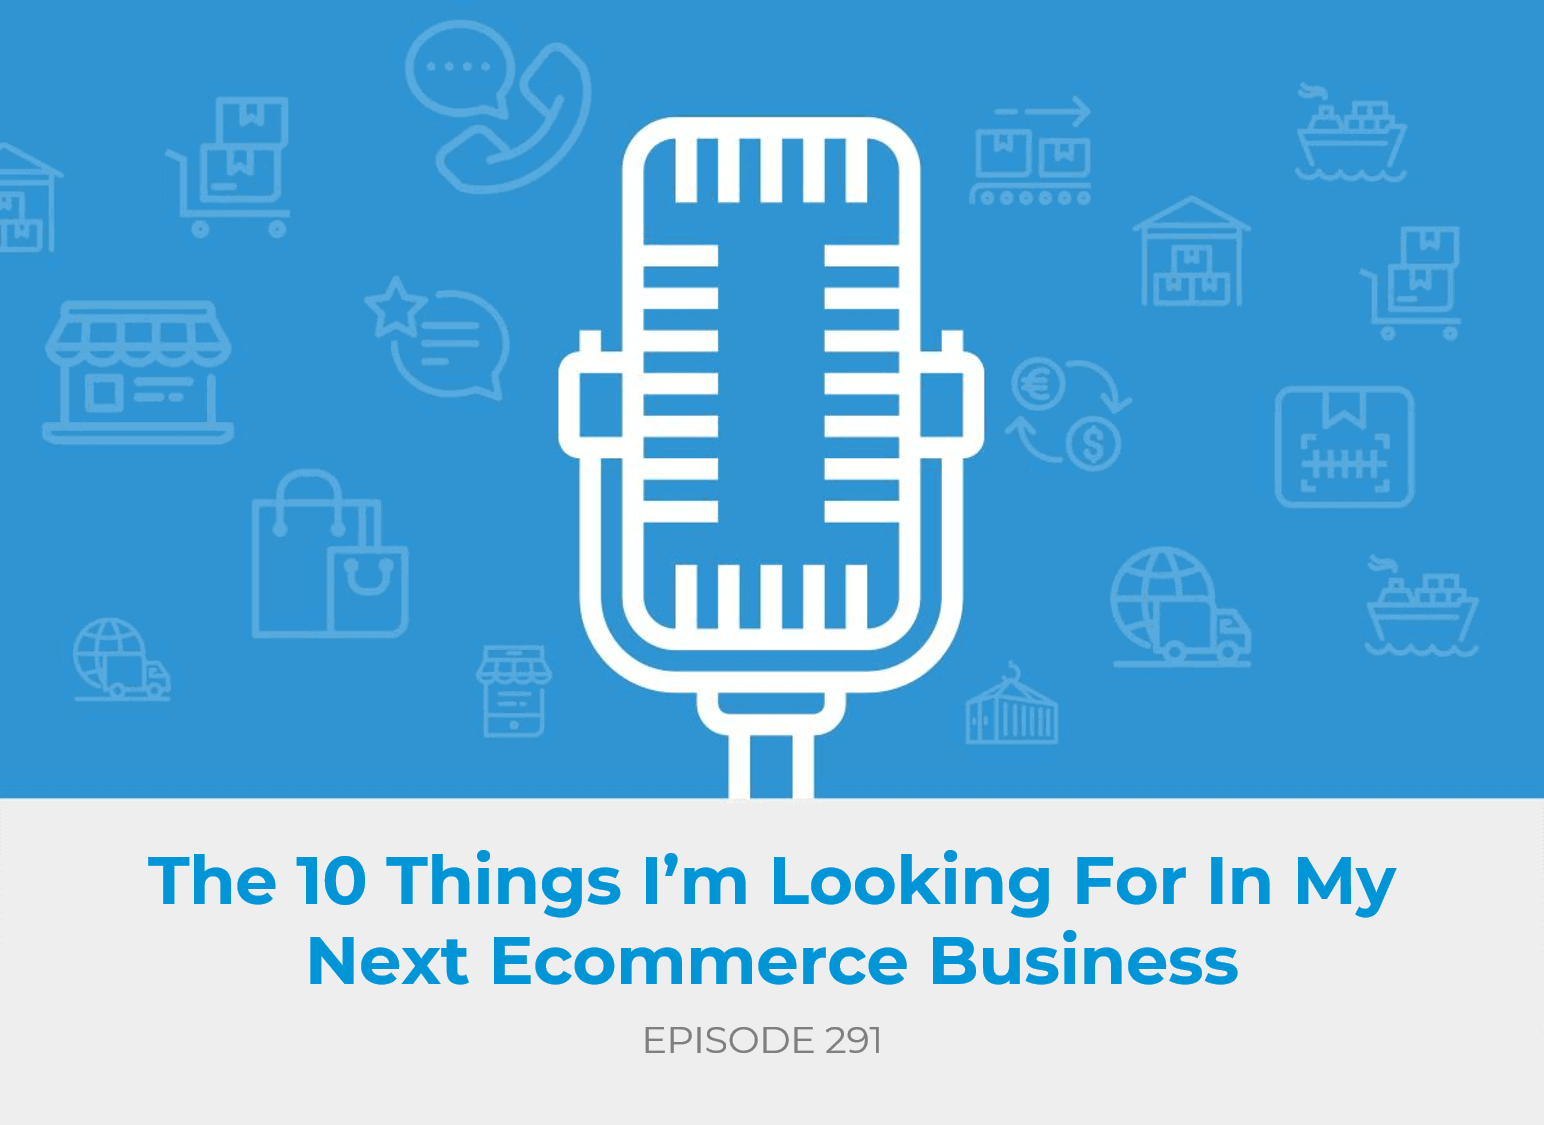 10 Things I'm Looking For in My Next Ecommerce Business